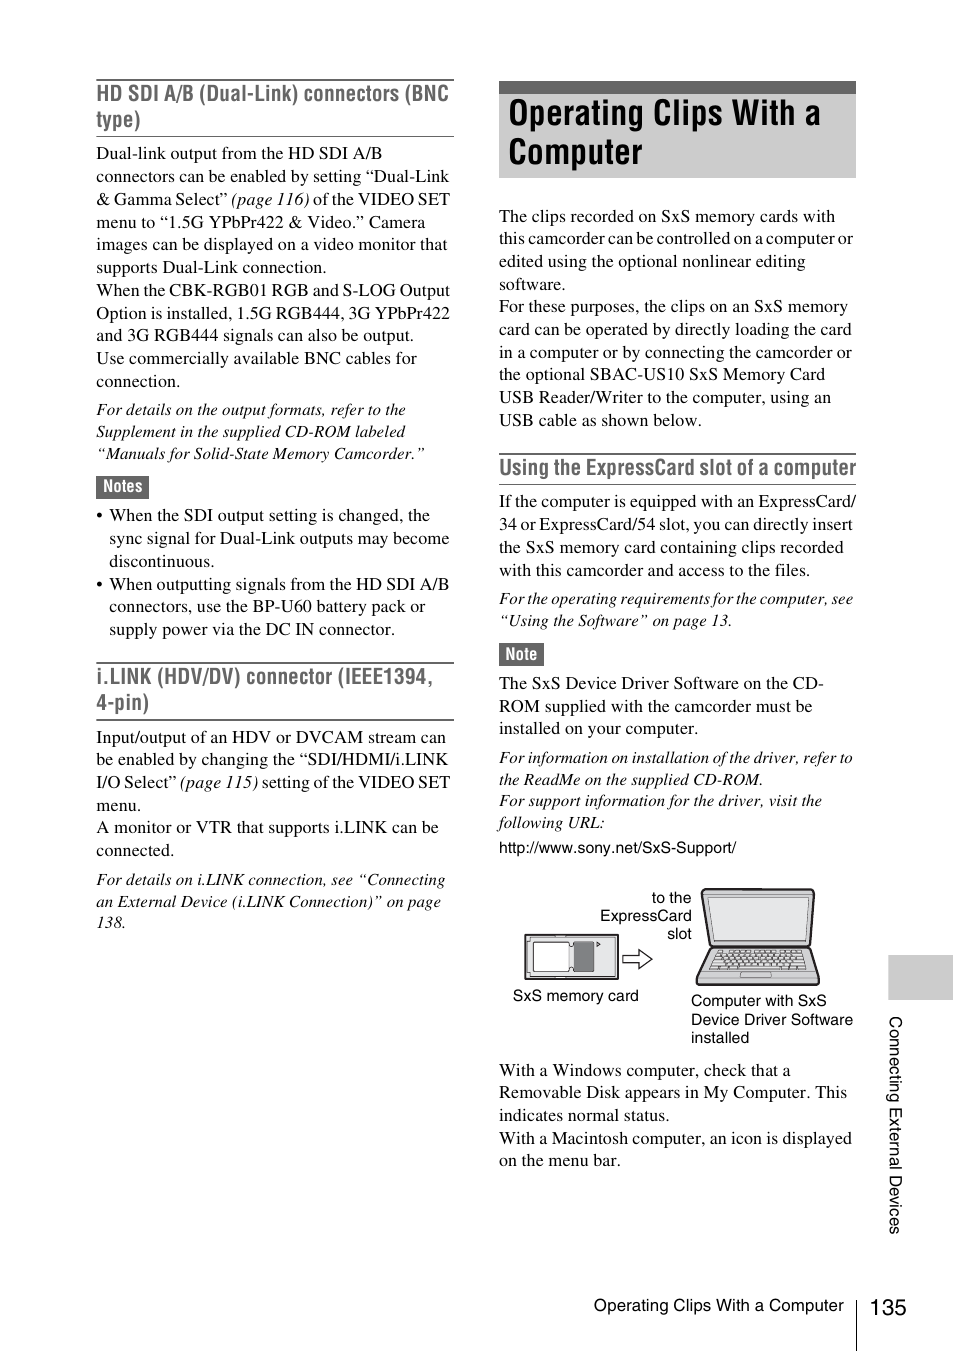 Operating clips with a computer, Hd sdi a/b (dual-link) connectors (bnc type), Using the expresscard slot of a computer | Sony PMW-F3K User Manual | Page 135 / 164